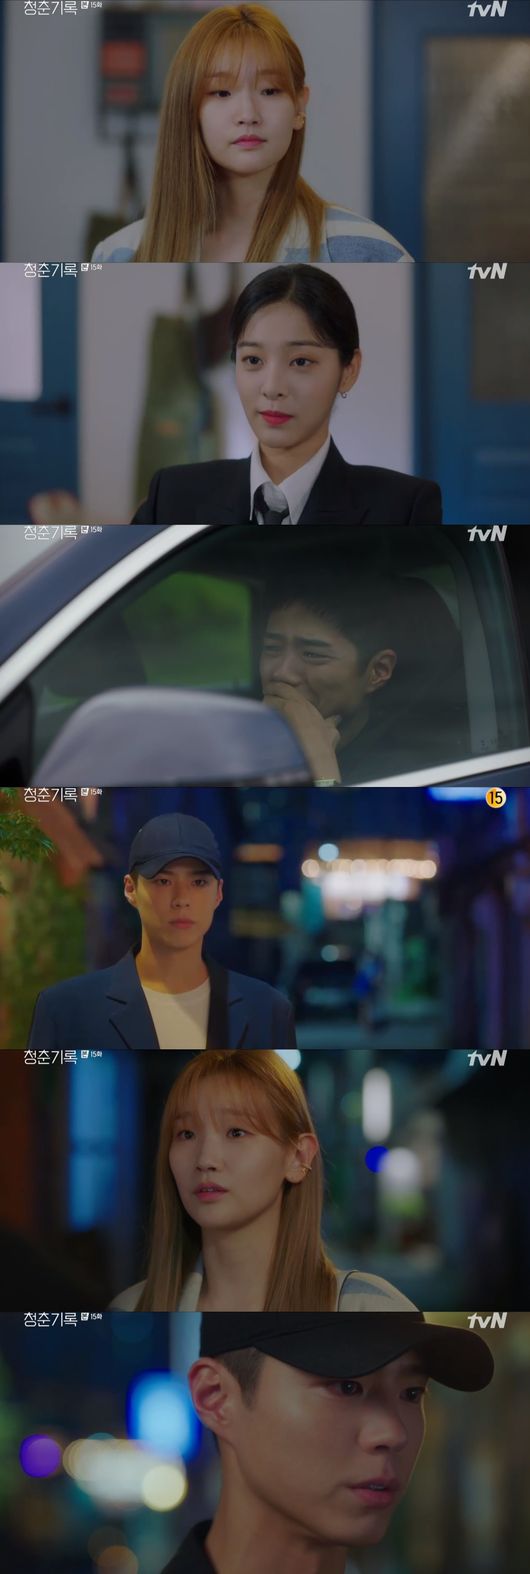 Park Bo-gum grabs Park So-damIn TVN Mon-Tue drama Record of Youth broadcast on the 26th, Park Bo-gum caught Park So-dam.After being informed of his separation by Ahn Jung-ha, Sa Hye-joon came into the room alone and endured his separation.Kim Su-man was sued for defamation by Sa Hye-joon, who was turned away from the company and was frustrated that there was no other way but to reach an agreement.Kim Soo-man met Jeong Ji-a and Kim Soo-man found out that he was misunderstood by Lee Tae-soos words.Kim Su-man visited Lee Tae-soo and asked the facts. Kim Su-man said, I was famous for eating a lot of money for my young model.Lee Tae-soo laughed, Why do you listen to what you want to hear? Kim Soo-man, who was angry, shouted that he would smash Lee Tae-soos company.Lee Min-jae visited Sa Hye-joon. Lee Min-jae said, I had an accident. Sa Hye-joon found out that the last text of himself and Charlies justice was revealed to the world.But positive and negative opinions followed.Its the same pattern all the time, and when it explodes, something new comes along, so I told you to wait, said Sa Hye-joon. I did the best I could now.Were still before the renewal, he said.On that day, Jeong Ji-a found a shop under the stability. Jeong Ji-a said, Do not worry because I and Hye-joon are friends.Besides, my ex-girlfriend... I dont know because Im not cool. Jeong Ji-a said, I wont meet if Jung Ha cares. I am now an ex-girlfriend anyway, he said.Now Im really leaving you, good-bye, Jeong Ji-a said, I met Mr. Jung-ha. Im a good friend. I want to be friends regardless of you.Sa Hye-joon poured tears into his memory of An Jeong-ha while driving. Sa Hye-joon eventually found a shop in An Jeong-ha and faced An Jeong-ha at work.Sa Hye-joon said, I cant break up with you: TVN Mon-Tue drama Record of Youth broadcast capture